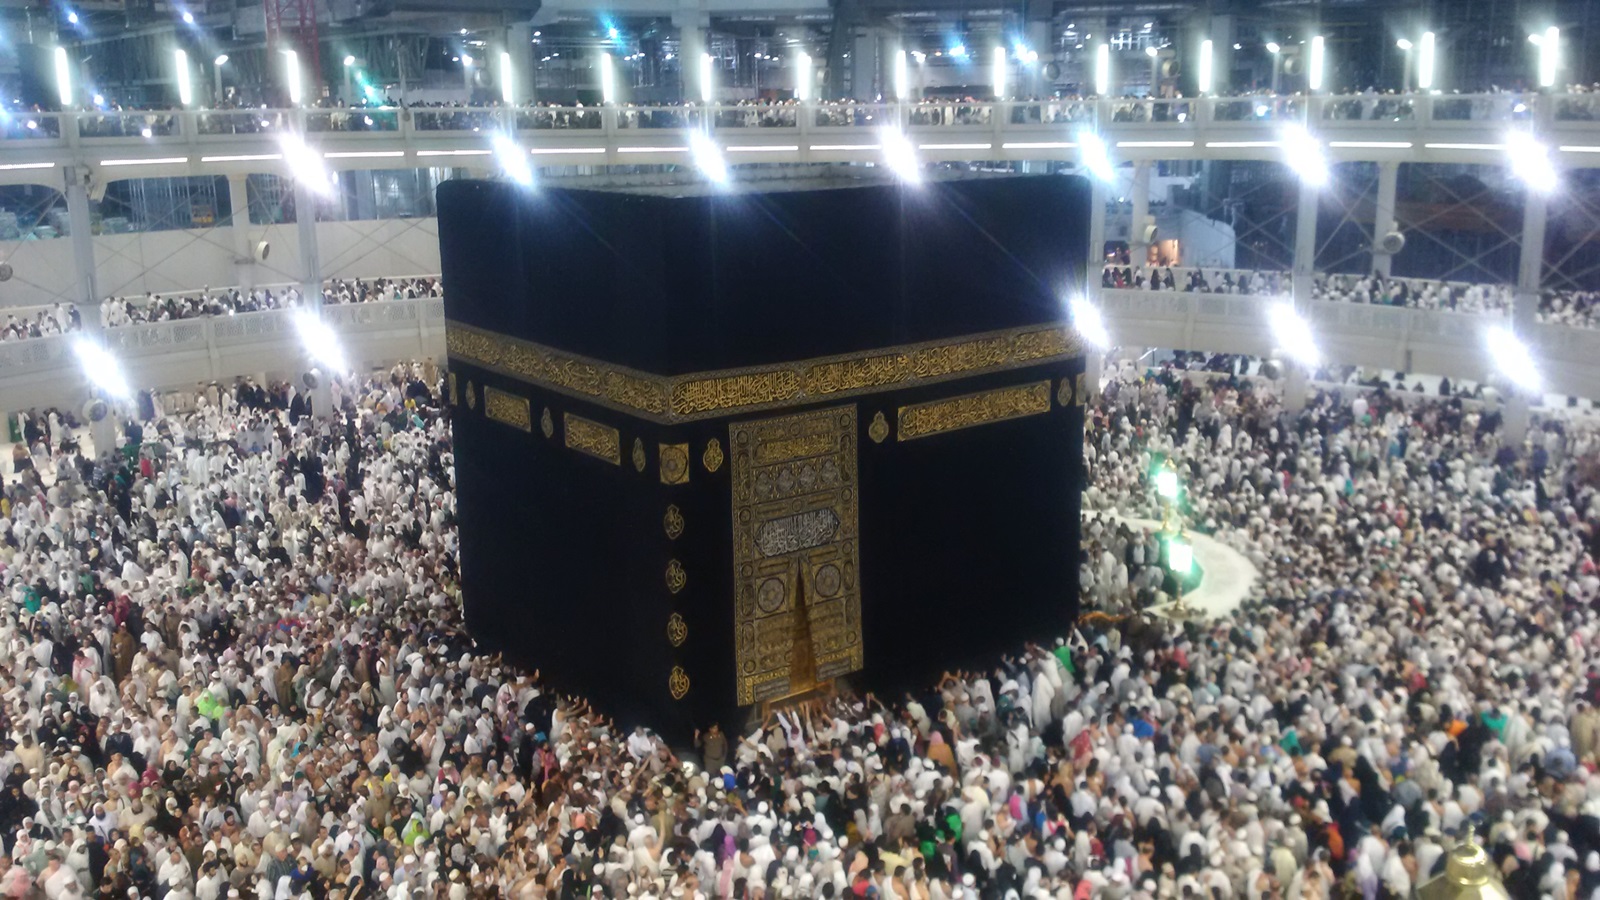 I took this picture of the Kabaa the second time we visited as we stayed 4 days and could take our time